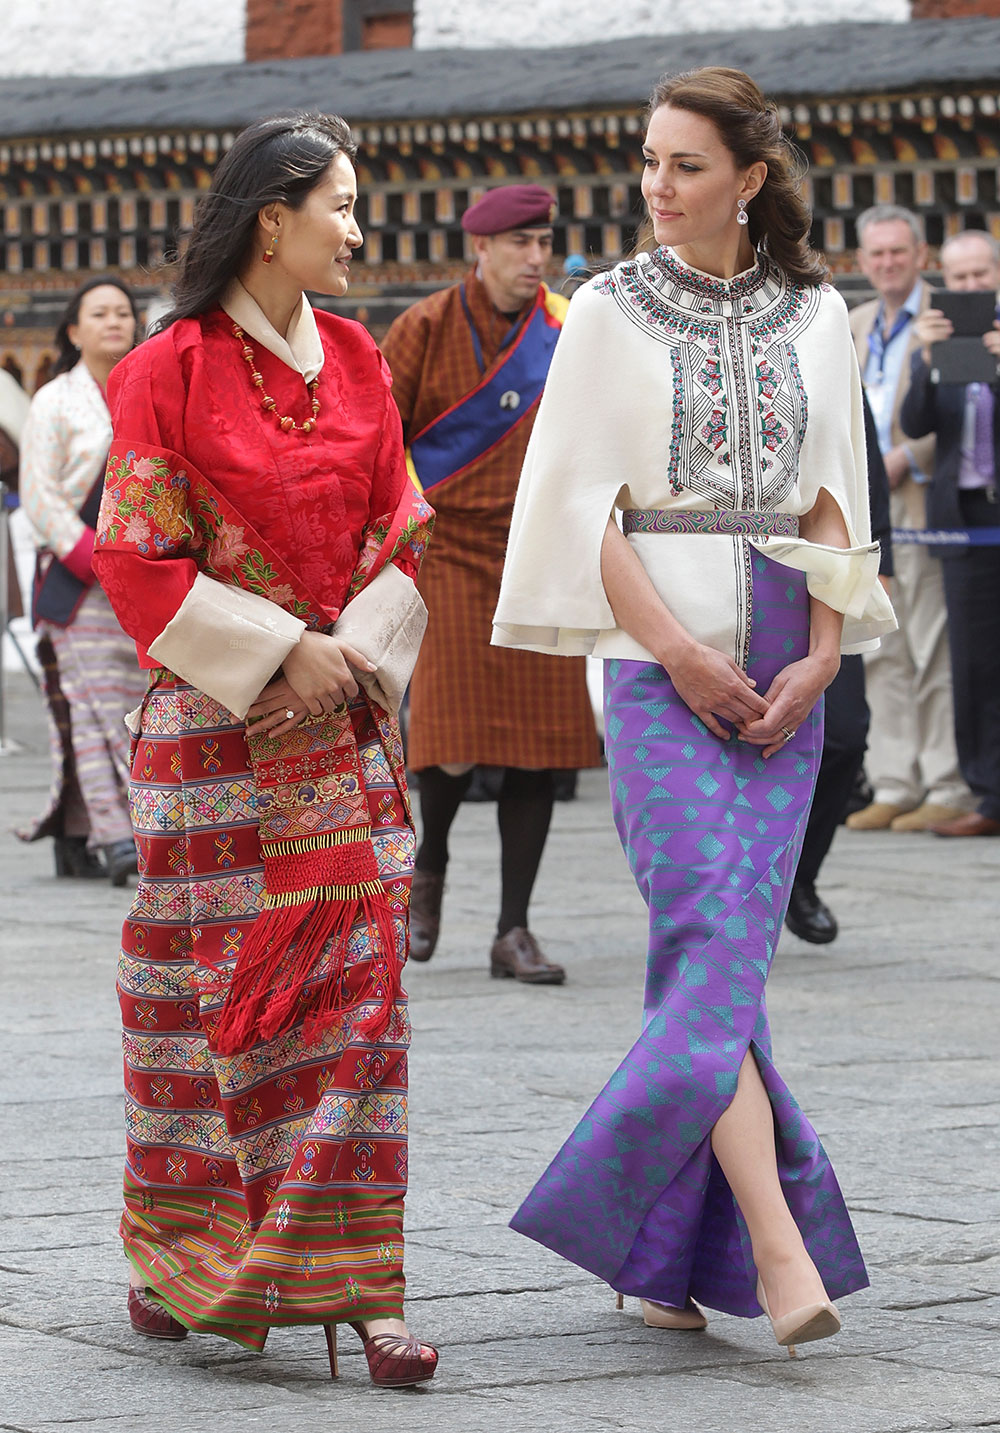 The Duchess of Cambridge walks with HM Jetsun Pema Wangchuck in front of monks in the Tashichhodzong (fortress) in Bhutan.